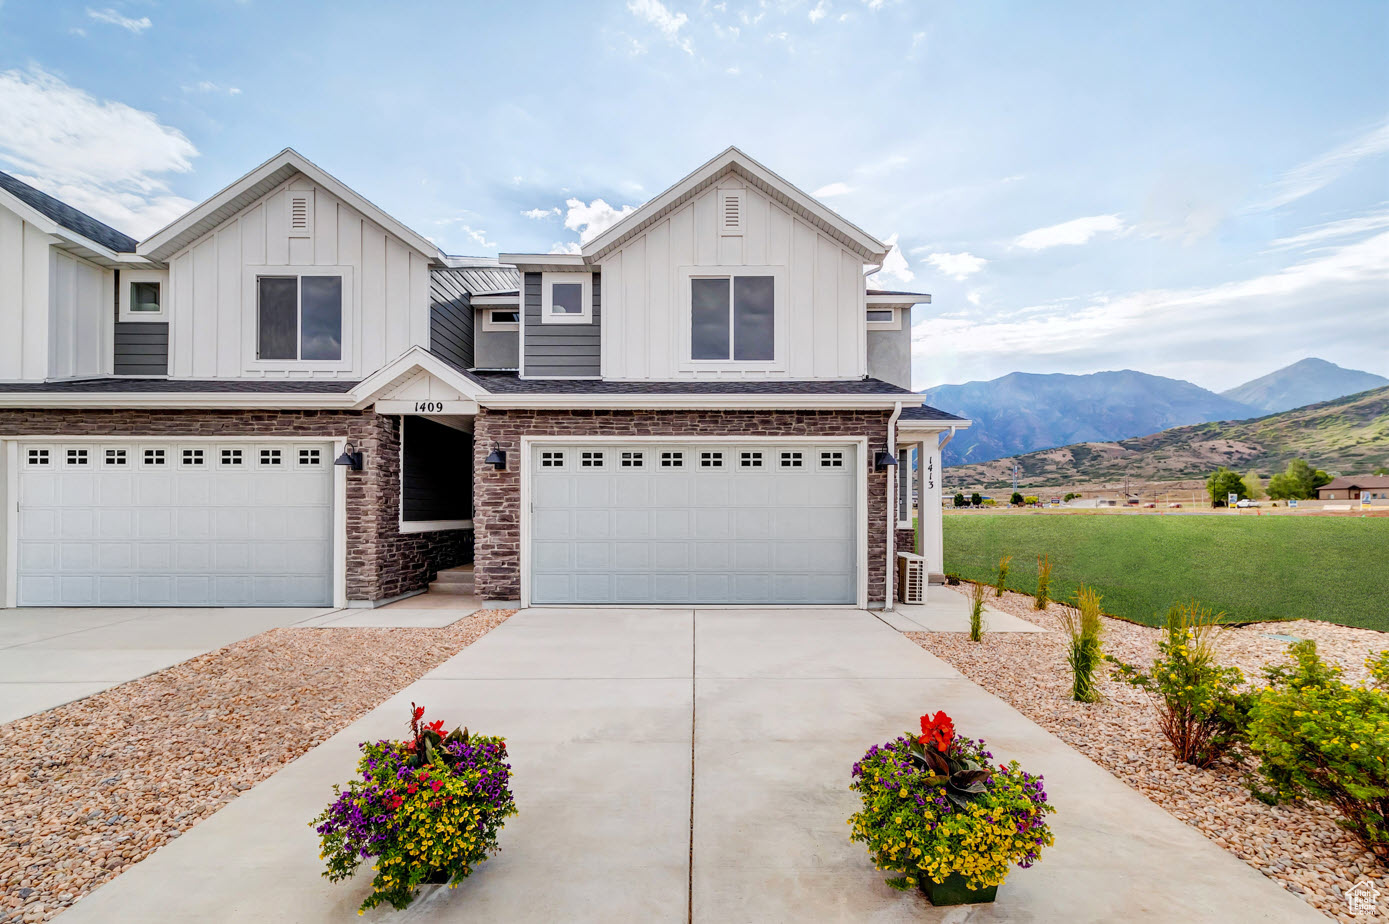 View of front of property with a garage and a mountain view